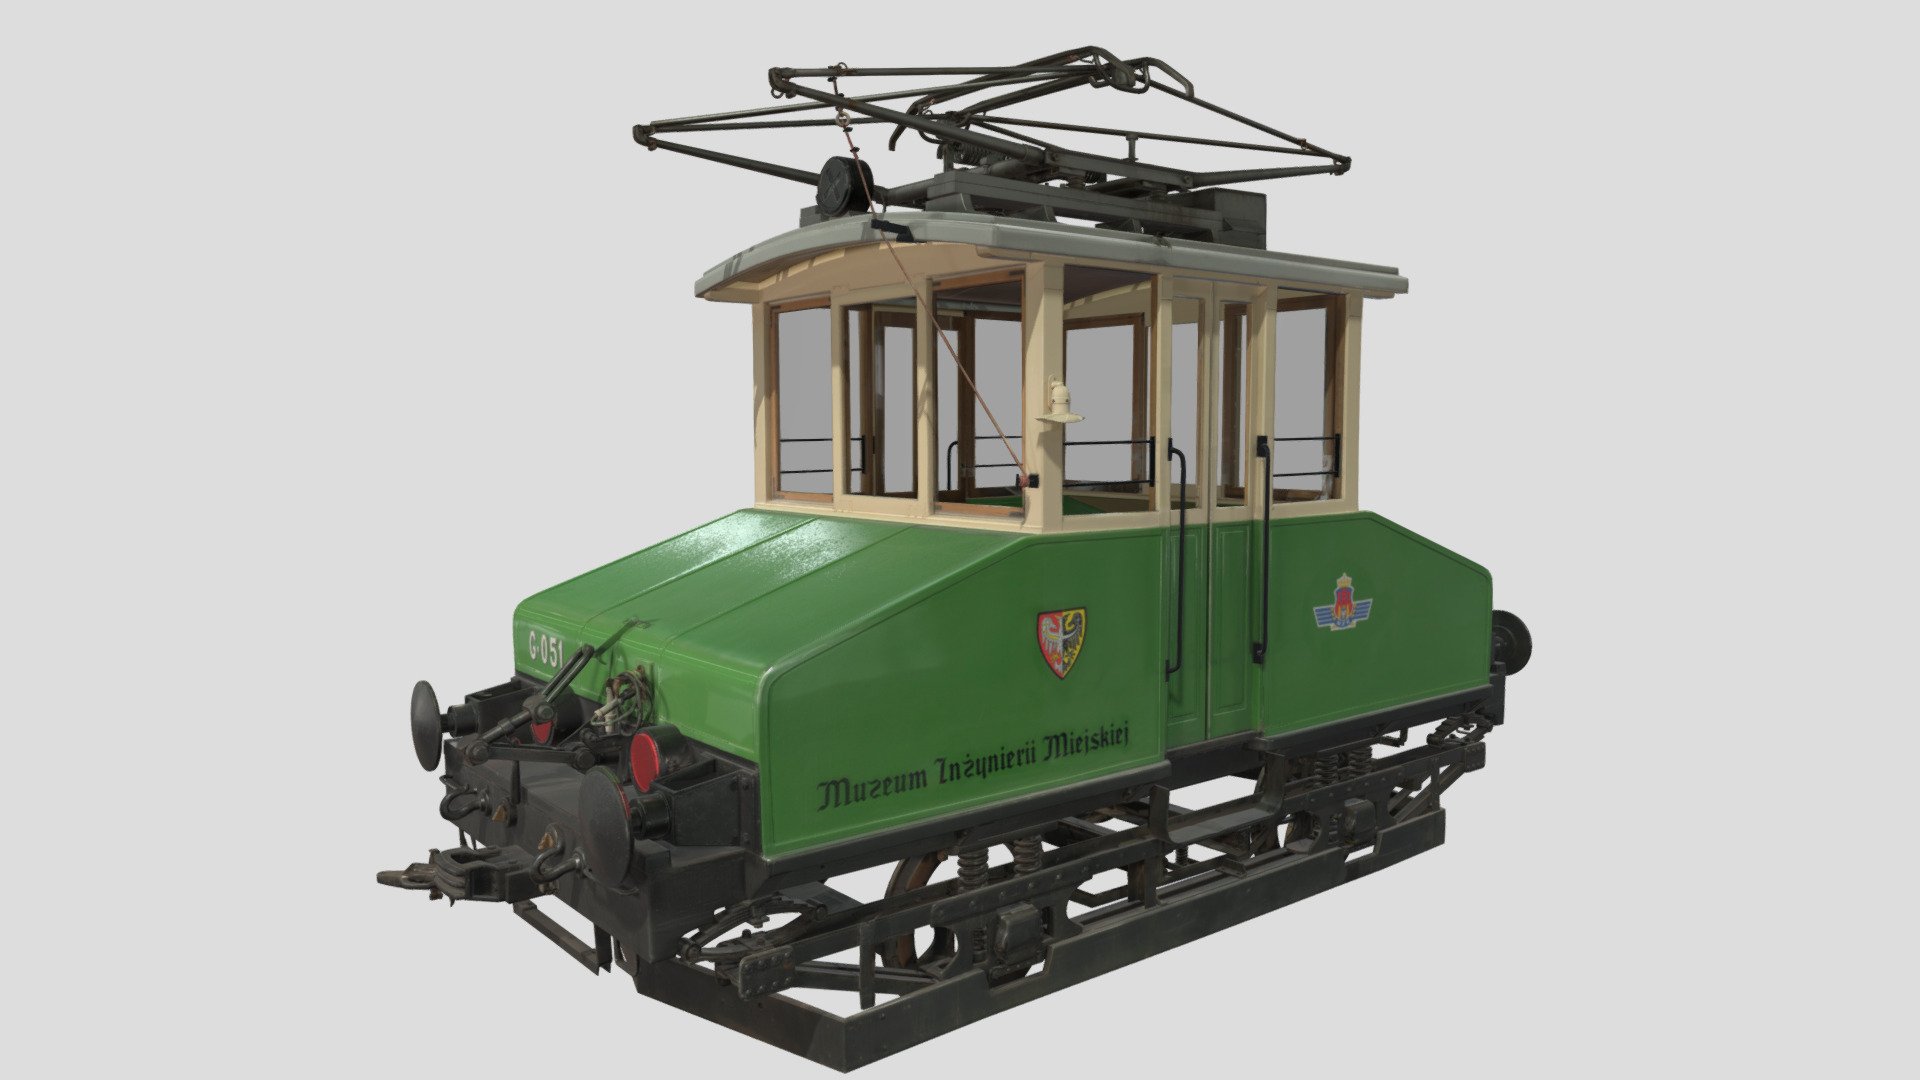 Apart from using vehicles intended for carrying passengers, transportation companies worldwide use technical support vehicles to enable their enterprises to operate effectively. This was also the case in pre-war Breslau. Between WWI and WWII the engine was designated as BT1 – Betriebs Triebwagen (service/freight car). The model presented is probably the only vehicle from Wroclaw of this type to survive WWII. After the war it took part in the campaign of clearing the post-war rubble in Wroclaw.
It has been part of the Museum of Urban Engineering’s collection since 2001. The tram was operated in Lower Silesia until the 1970’s. In 2016, thanks to subsidies obtained by the Museum, a restoration of the car was carried out in collaboration with MPK SA.

Manufacturer: Städtische Strassenbahn Breslau; Linke-Hofman-Werke AG, Breslau 1920.

Inv. No.: MIM346/I-6

Model prepared on the basis of photogrammetric and ToF measurements

Licence: CC BY-NC-SA - Towing car BT-1, number G-051 - Download Free 3D model by Museum of Engineering and Technology, Krakow (@mitkrakow) 3d model